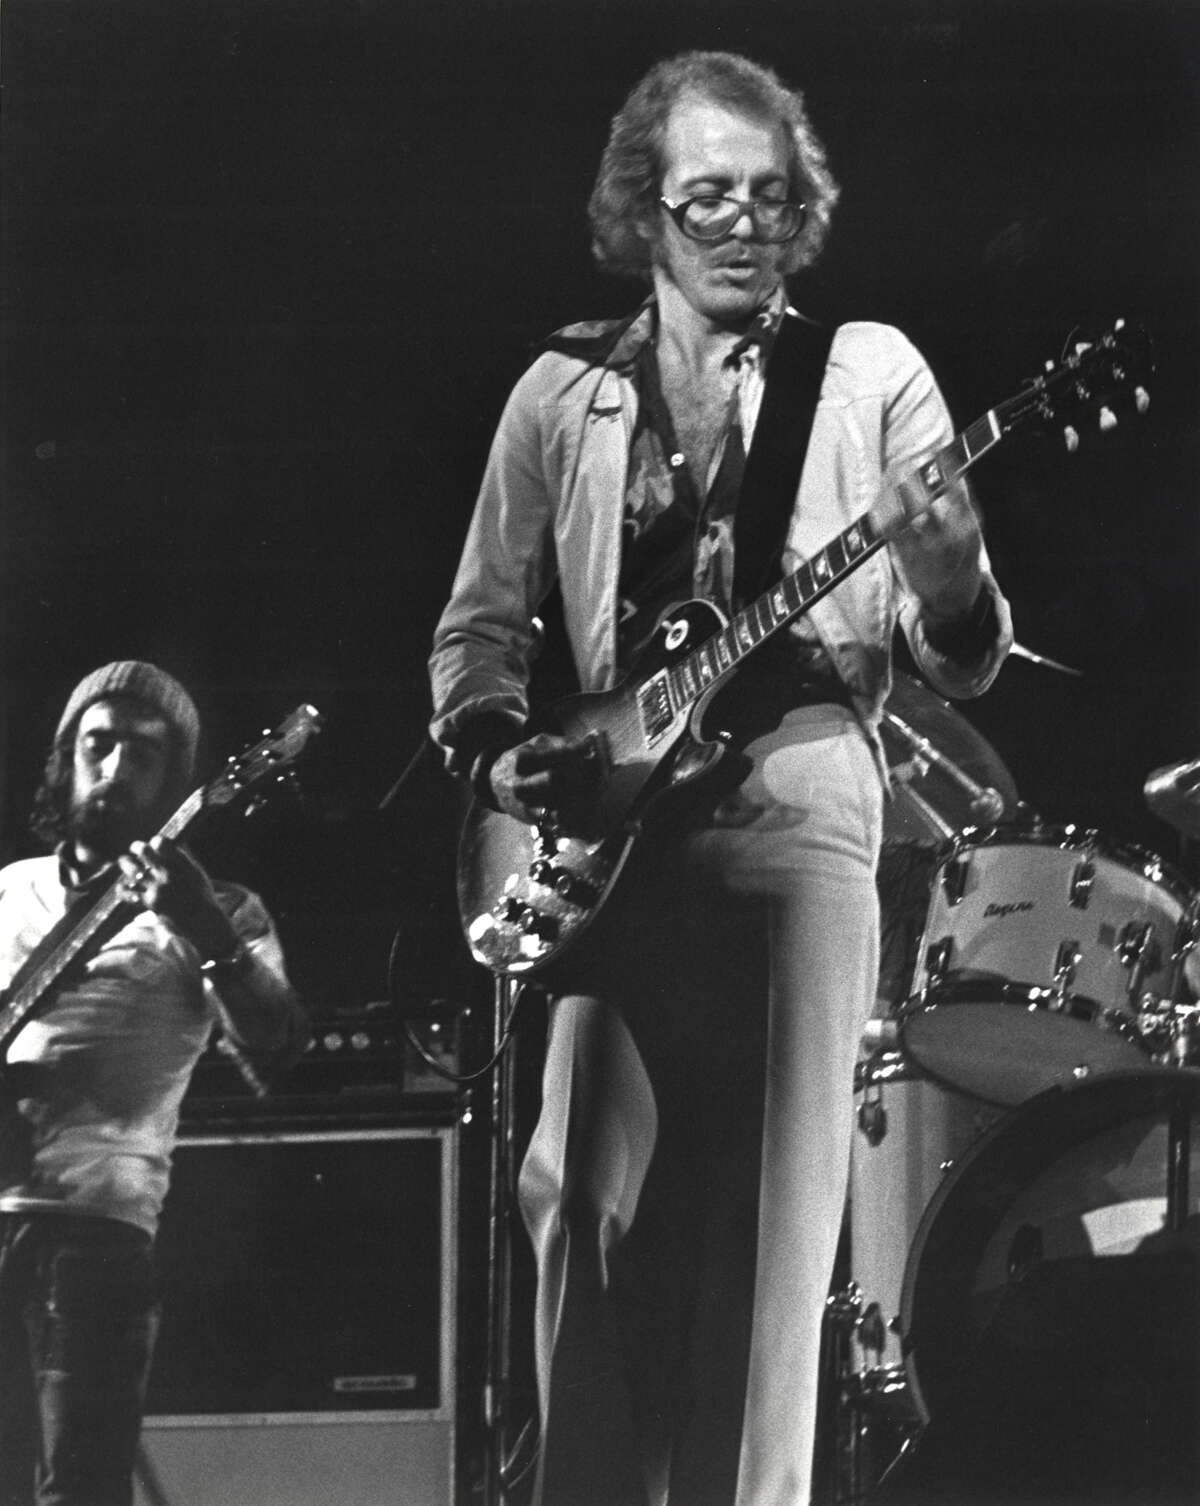 Bob Welch (right), lead guitar, and John McVie, bass, for Fleetwood Mac, perform with the band at Tarrant County Convention Center in Fort Worth in late 1974.